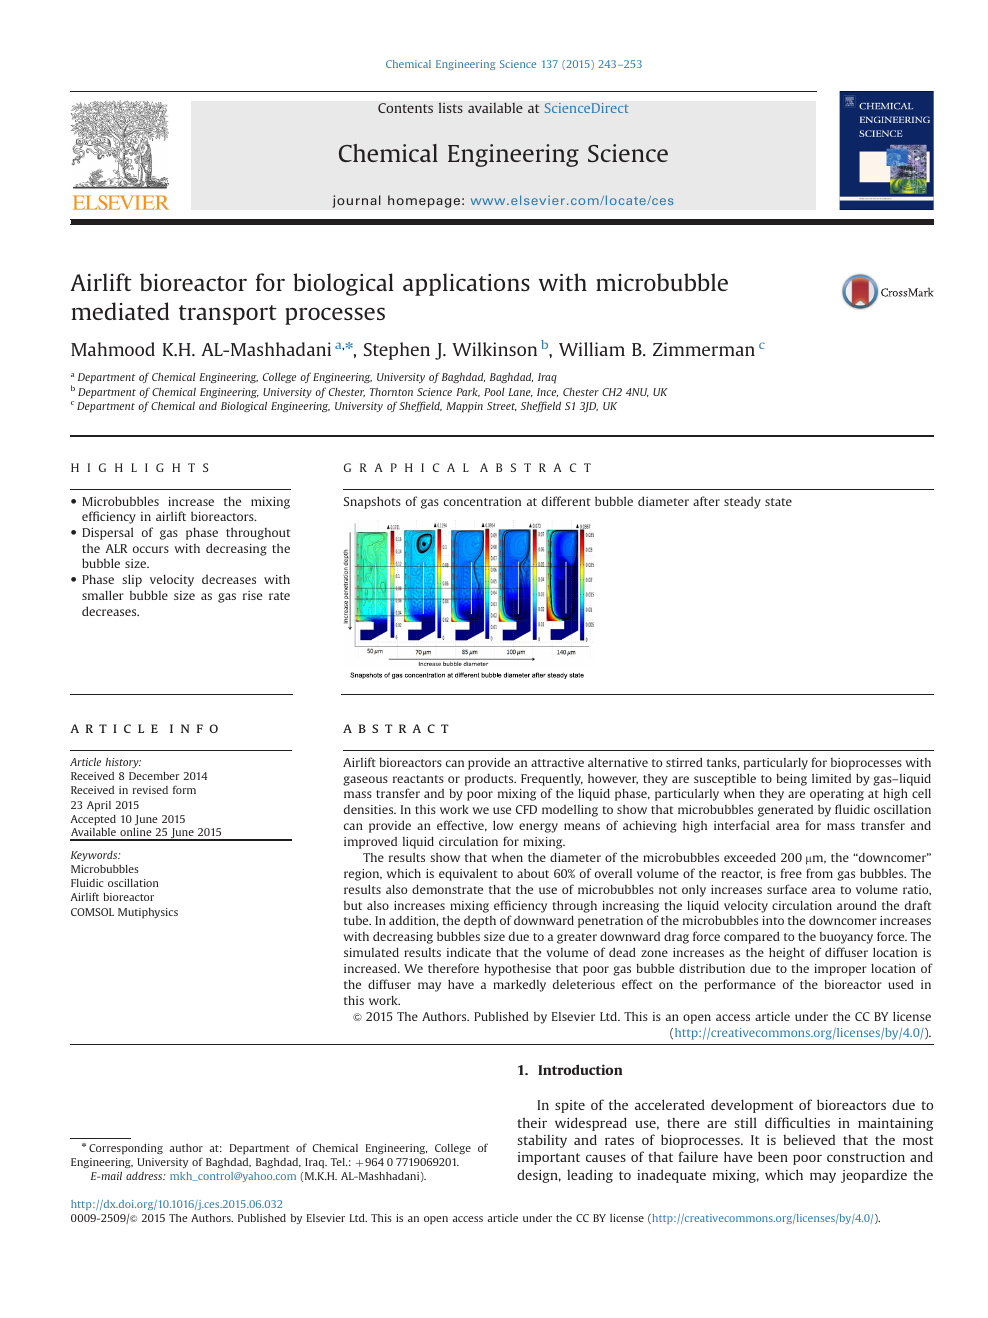 Airlift Bioreactor For Biological Applications With Microbubble Mediated Transport Processes Topic Of Research Paper In Chemical Engineering Download Scholarly Article Pdf And Read For Free On Cyberleninka Open Science Hub